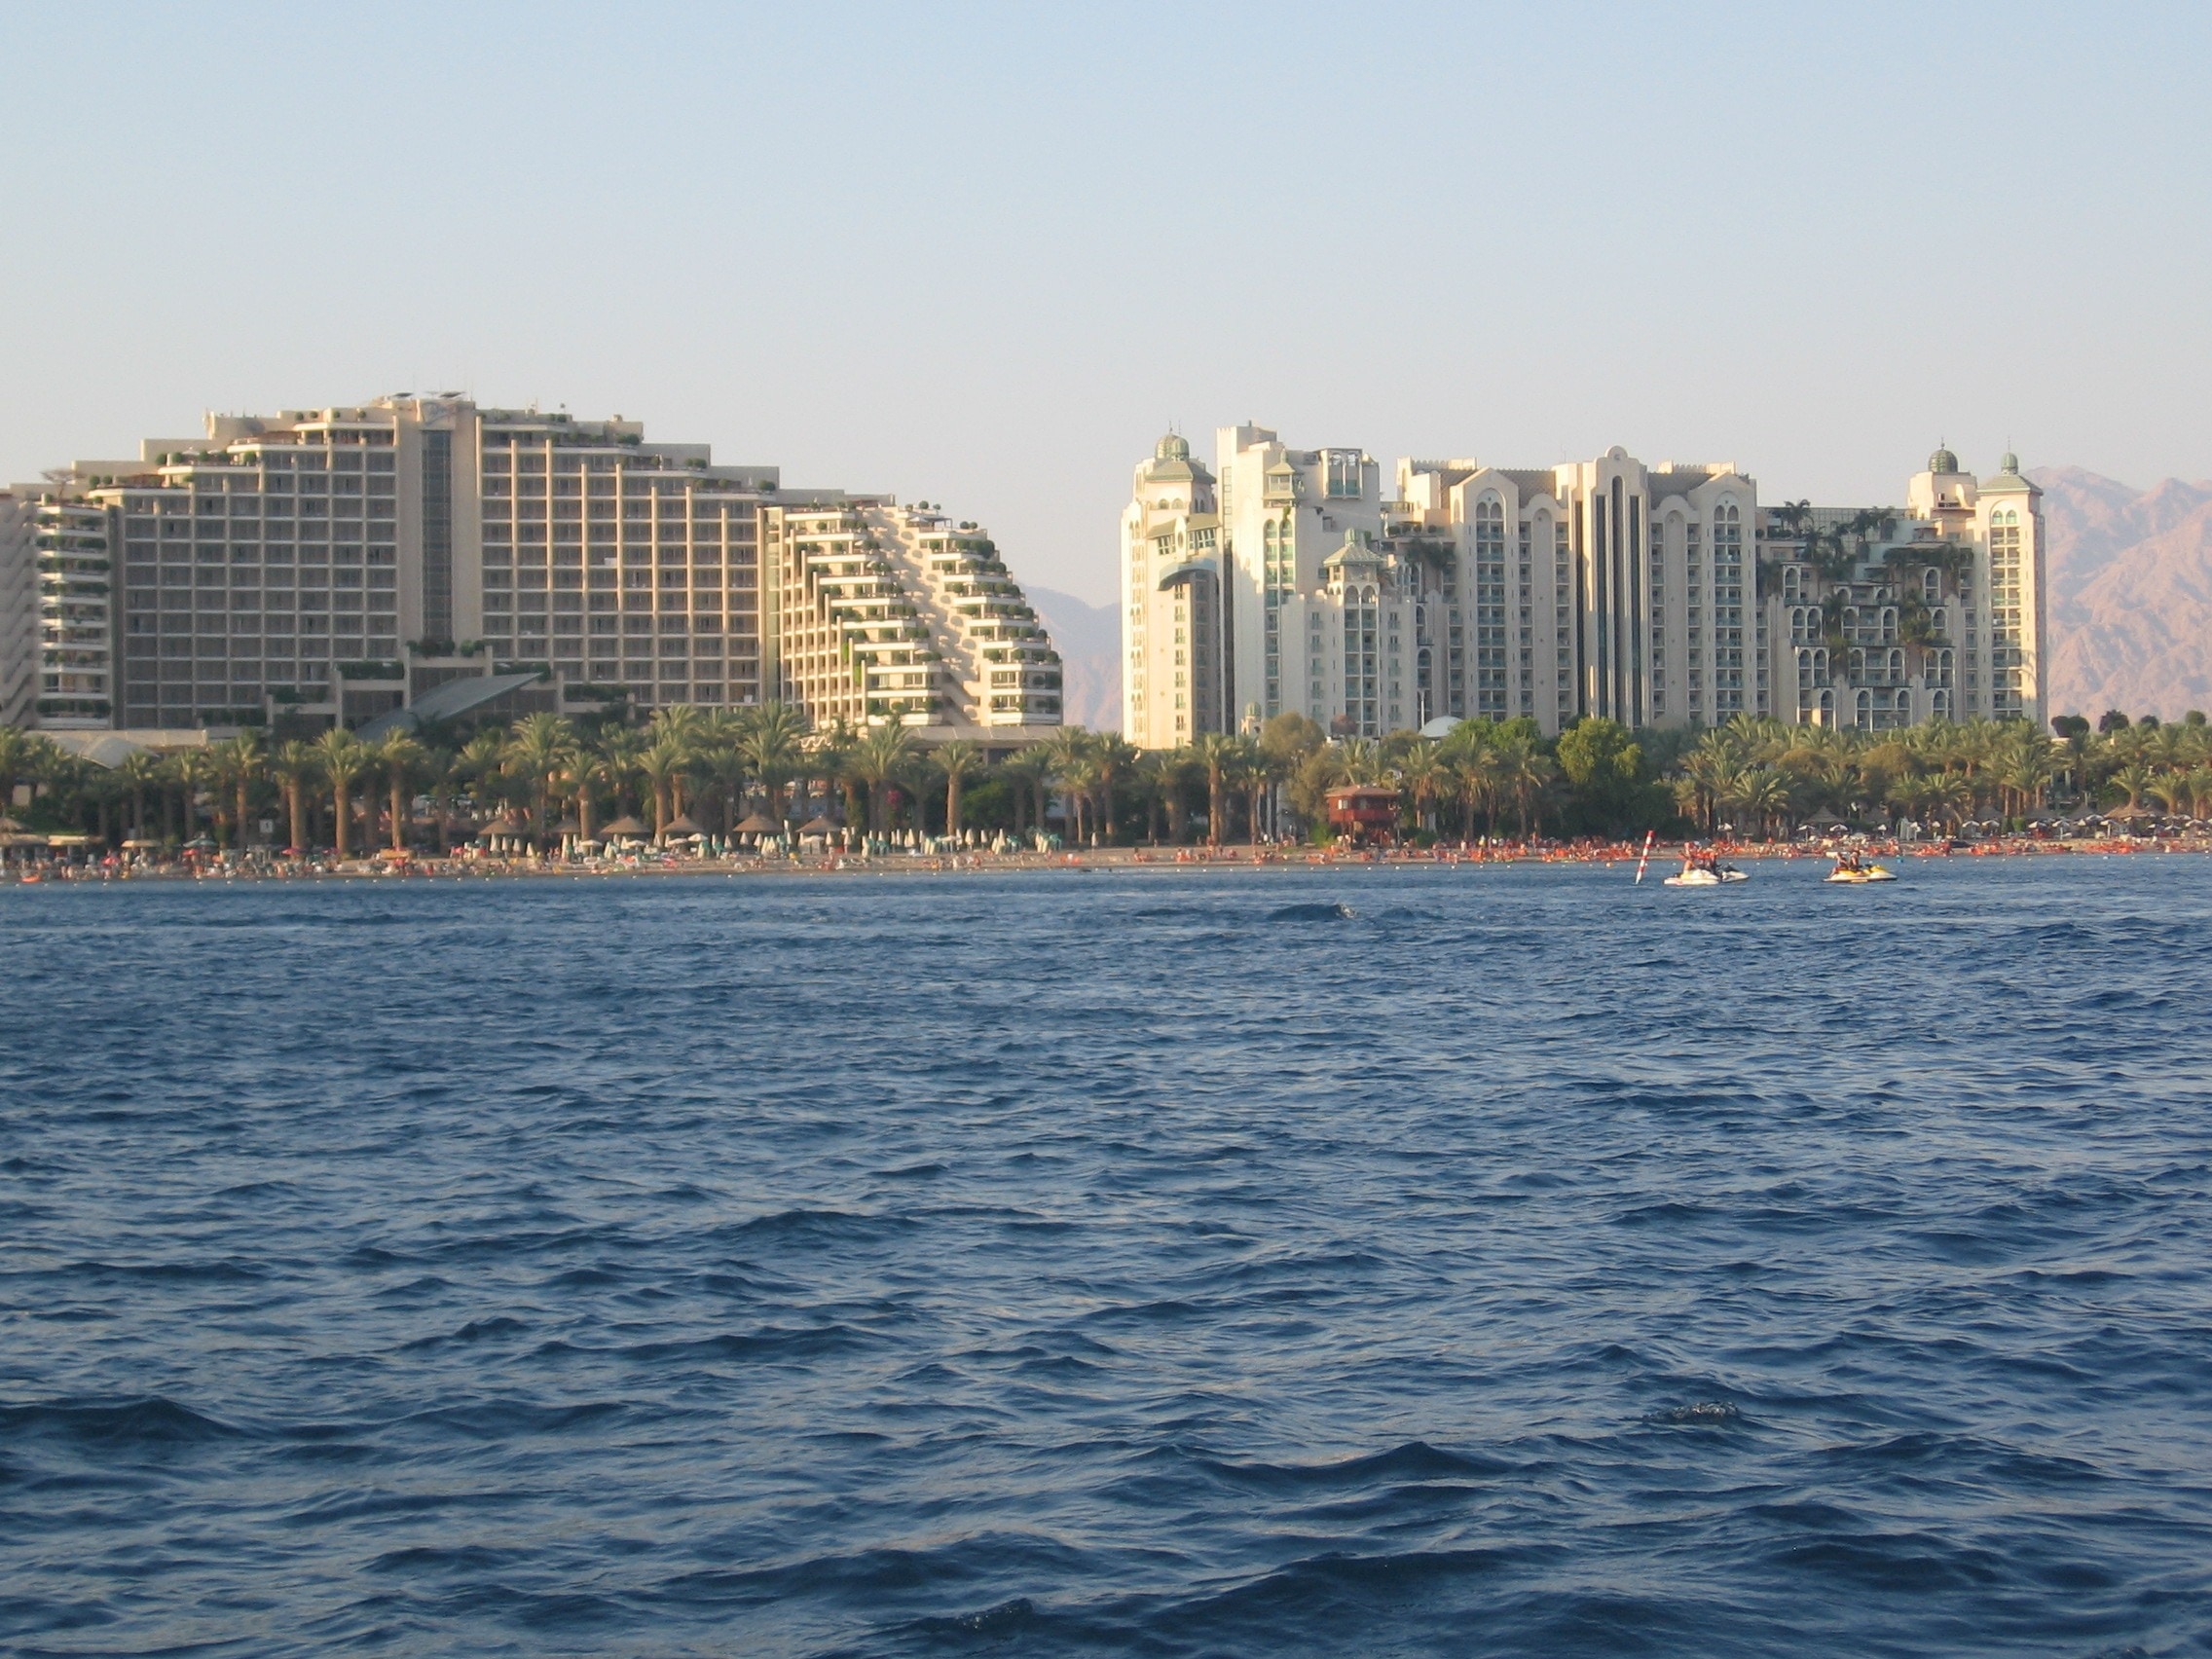 body of water near city with tall buildings under blue sky